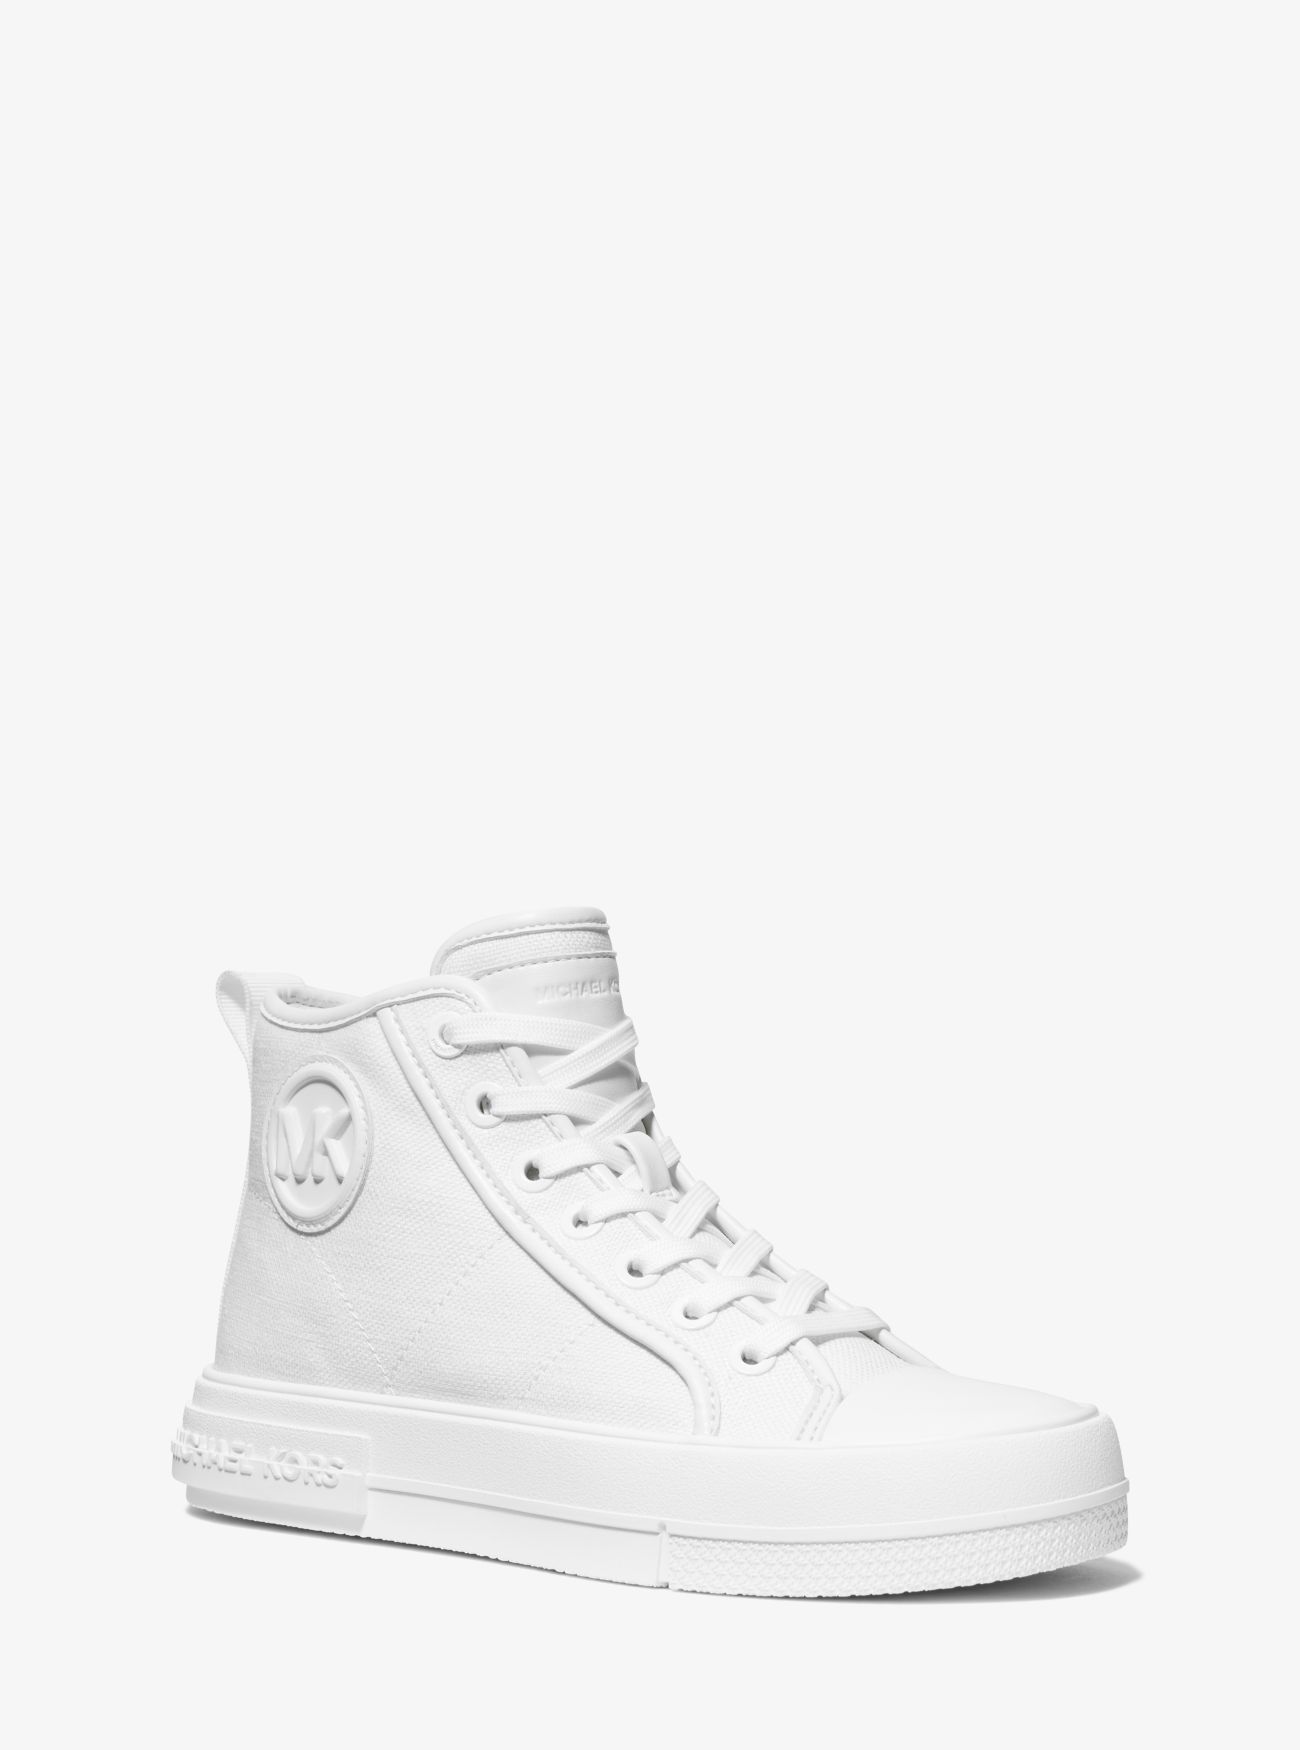 MK Evy Canvas High-Top Trainers - White - Michael Kors